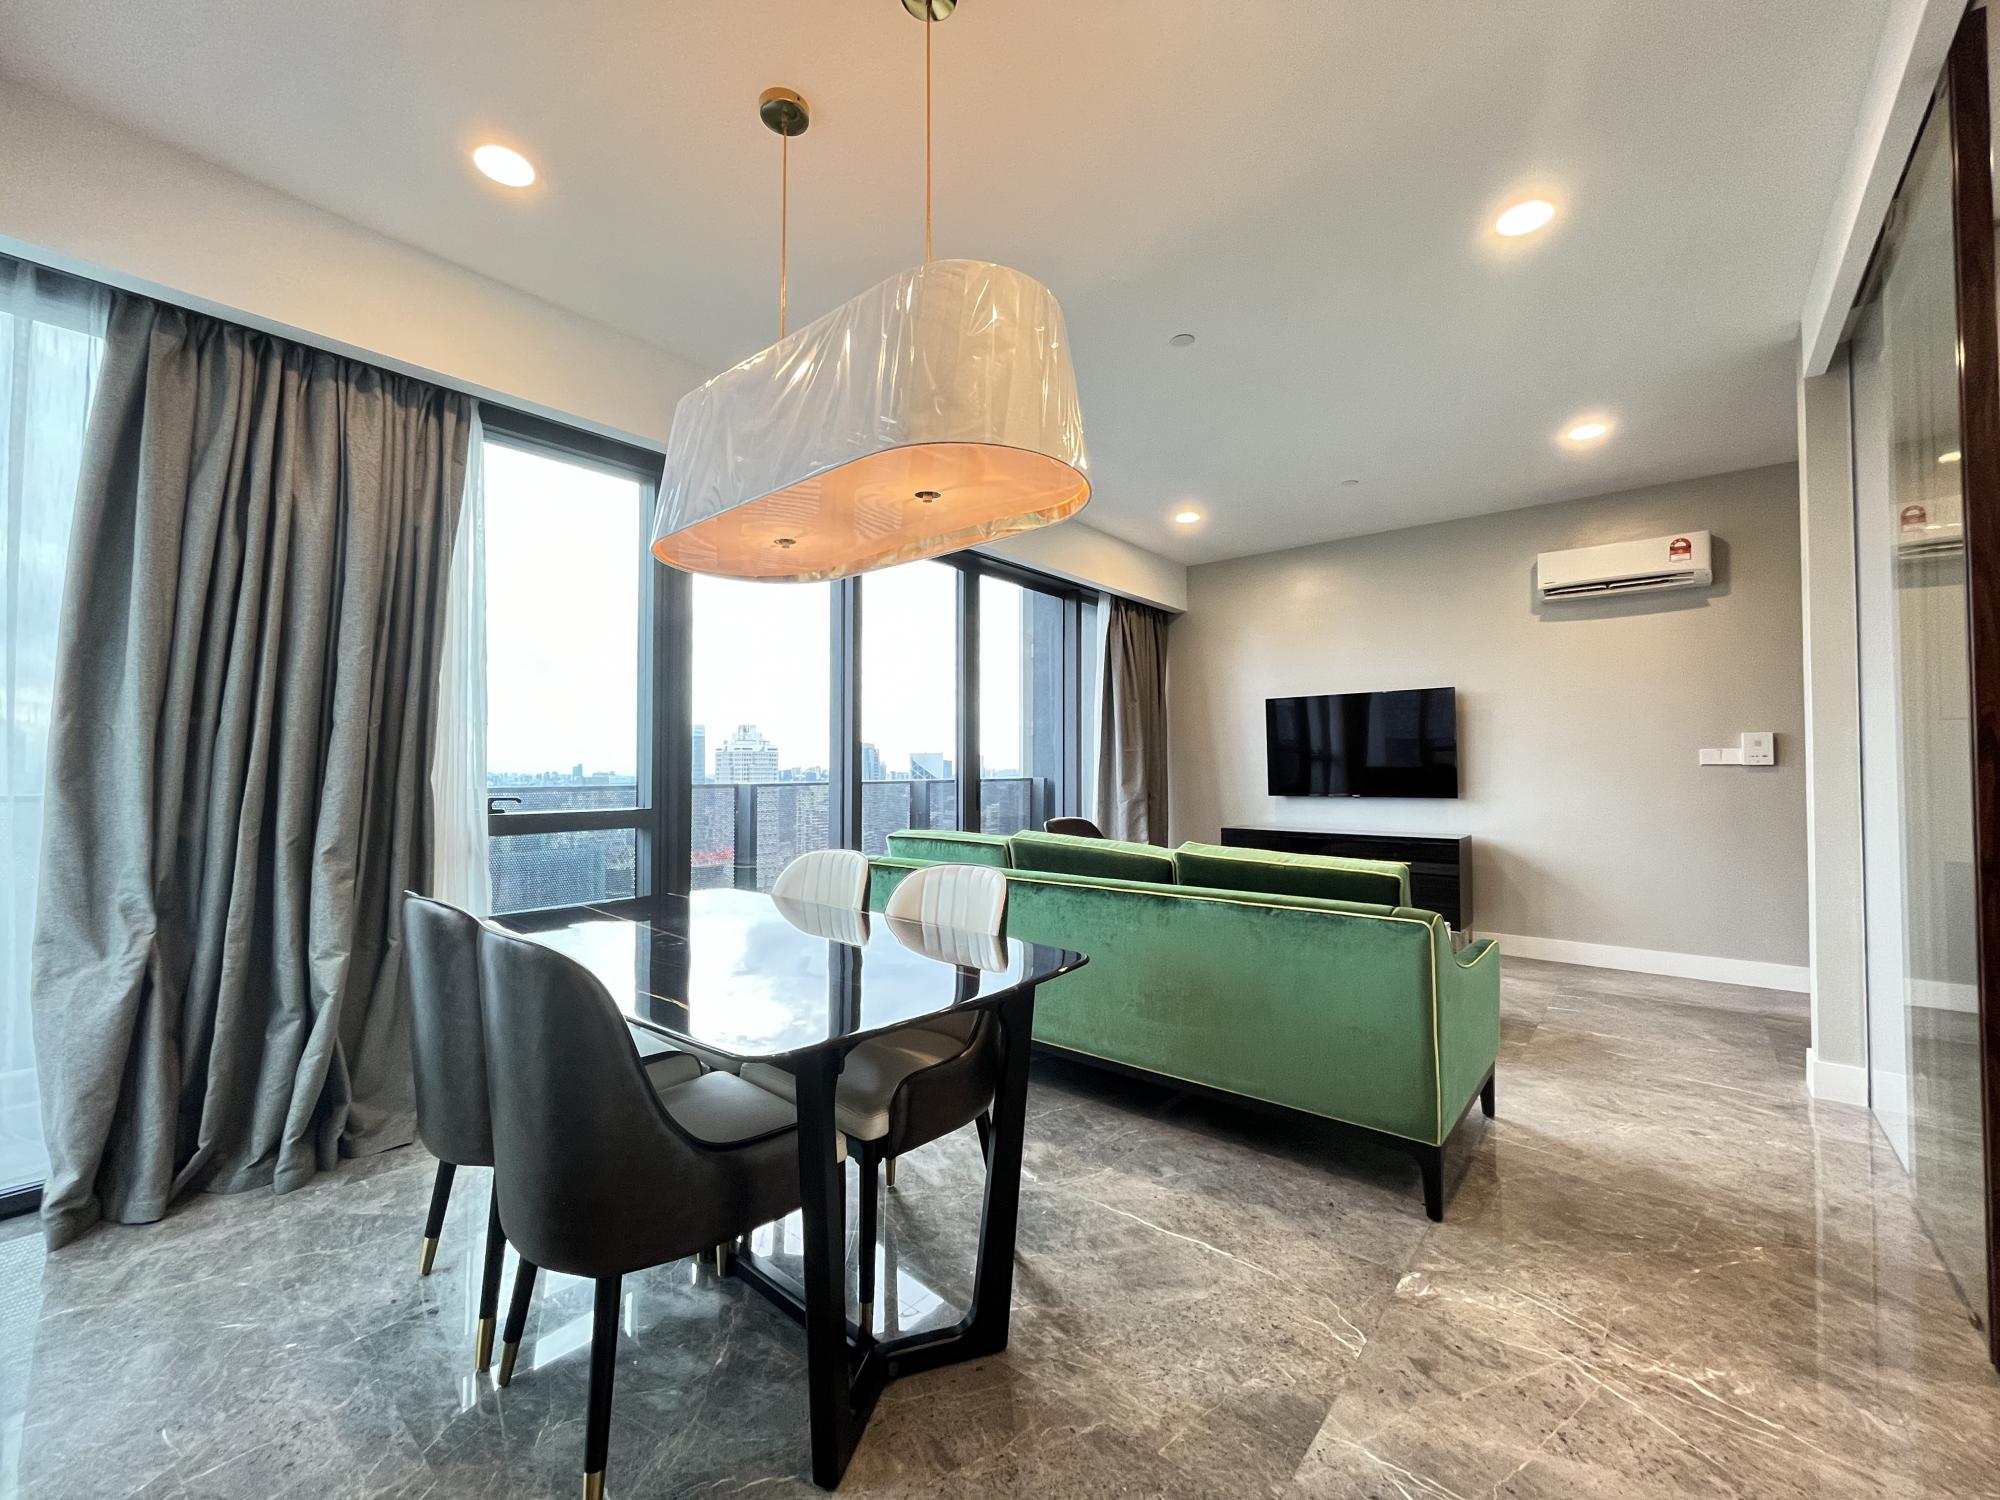 Property Image 1 - Contemporary Light Filled Two Bedroom Apartment with Balcony